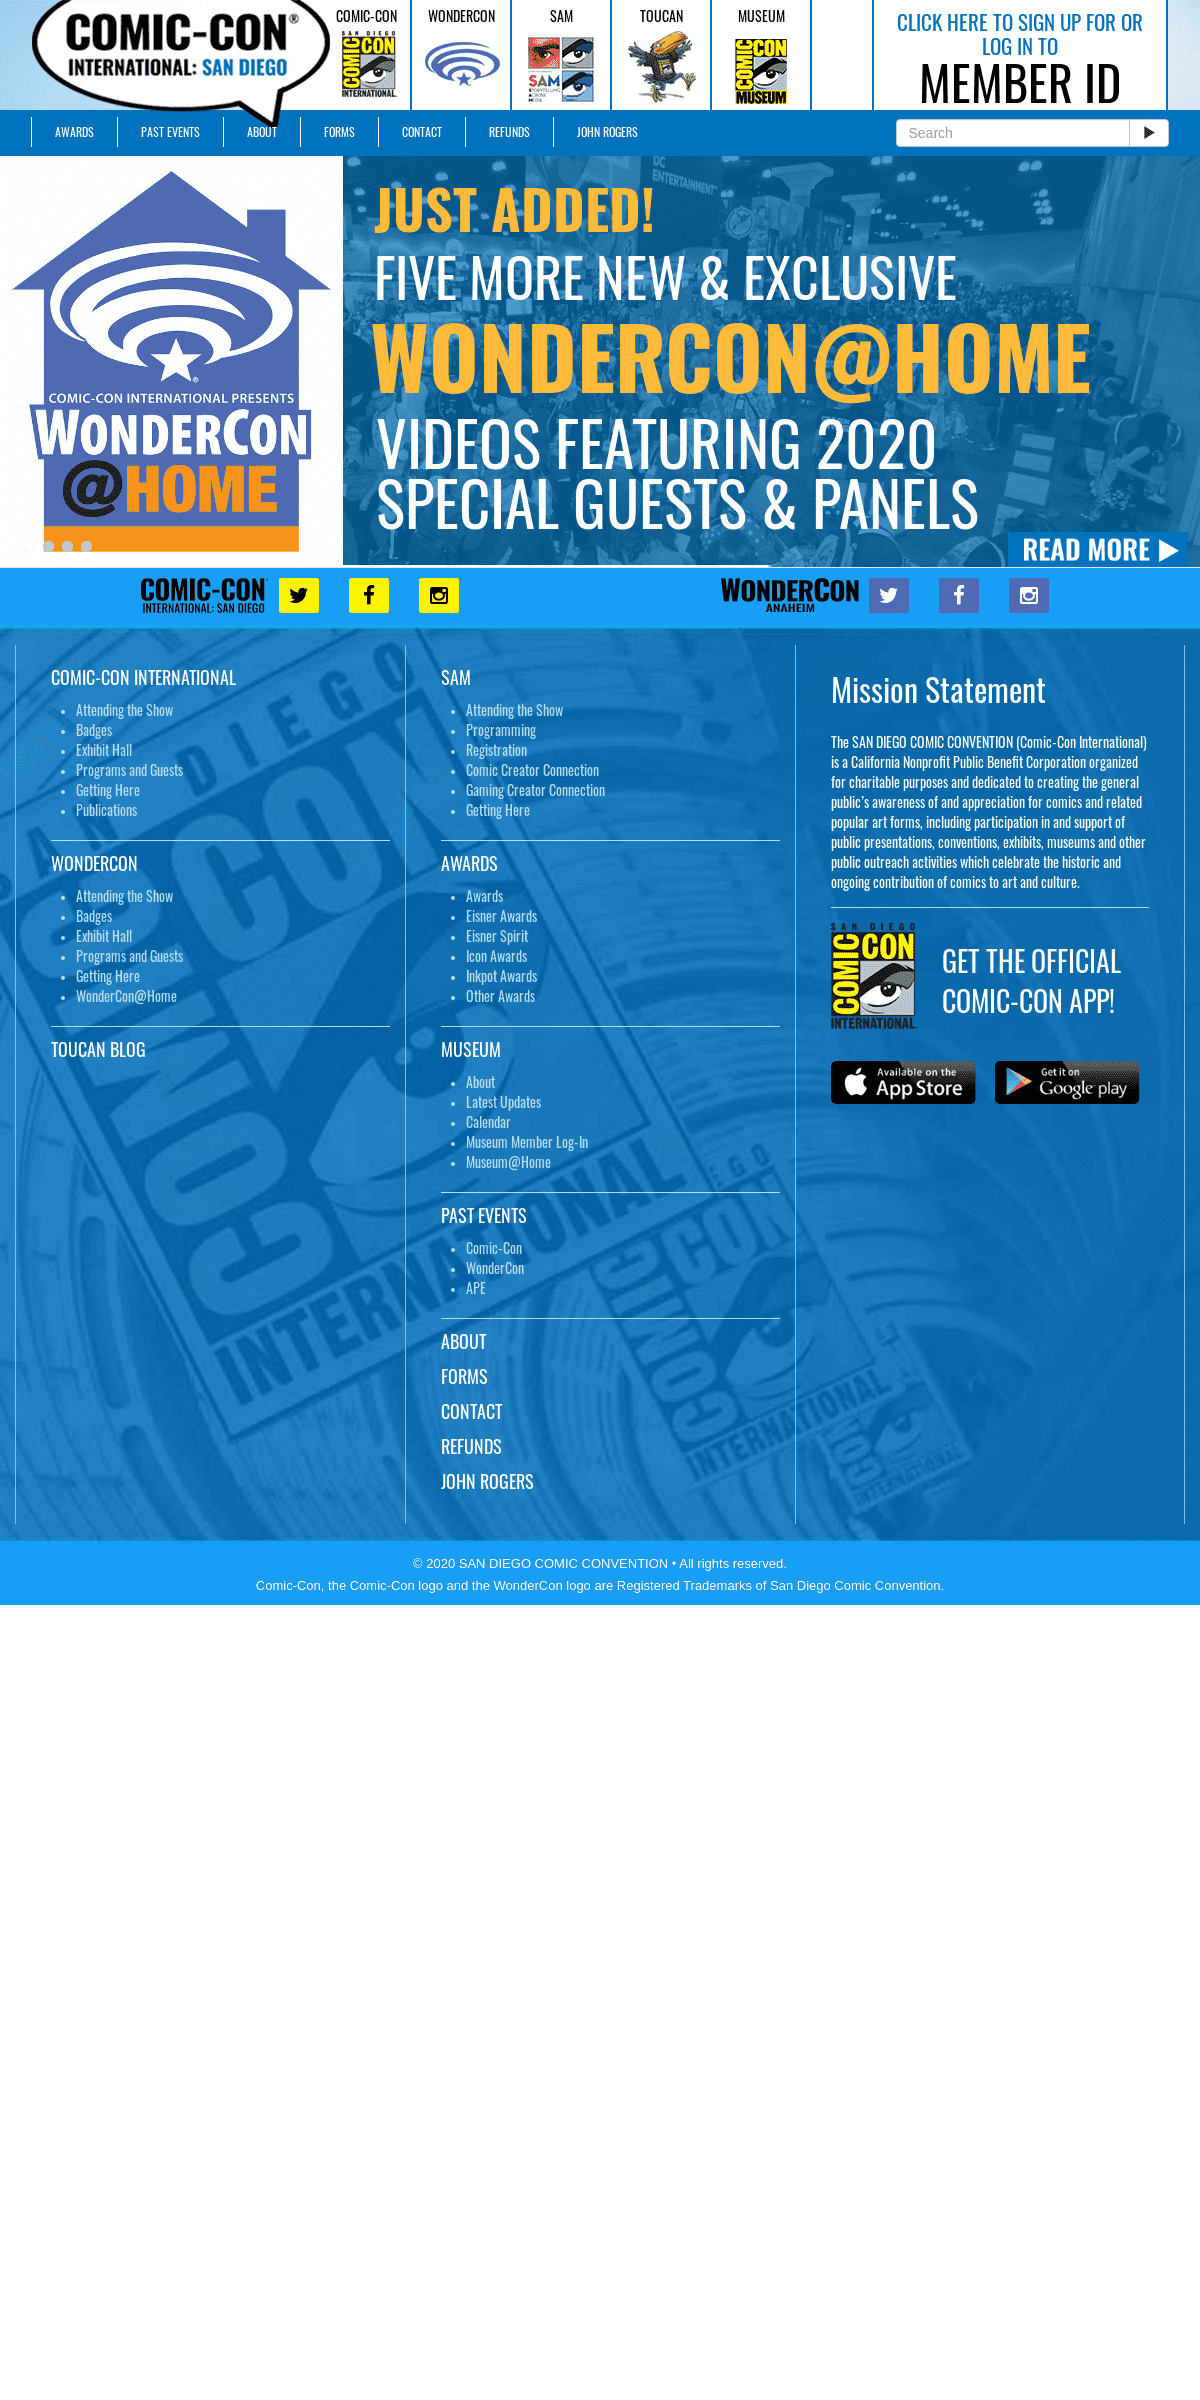 A complete backup of comic-con.org